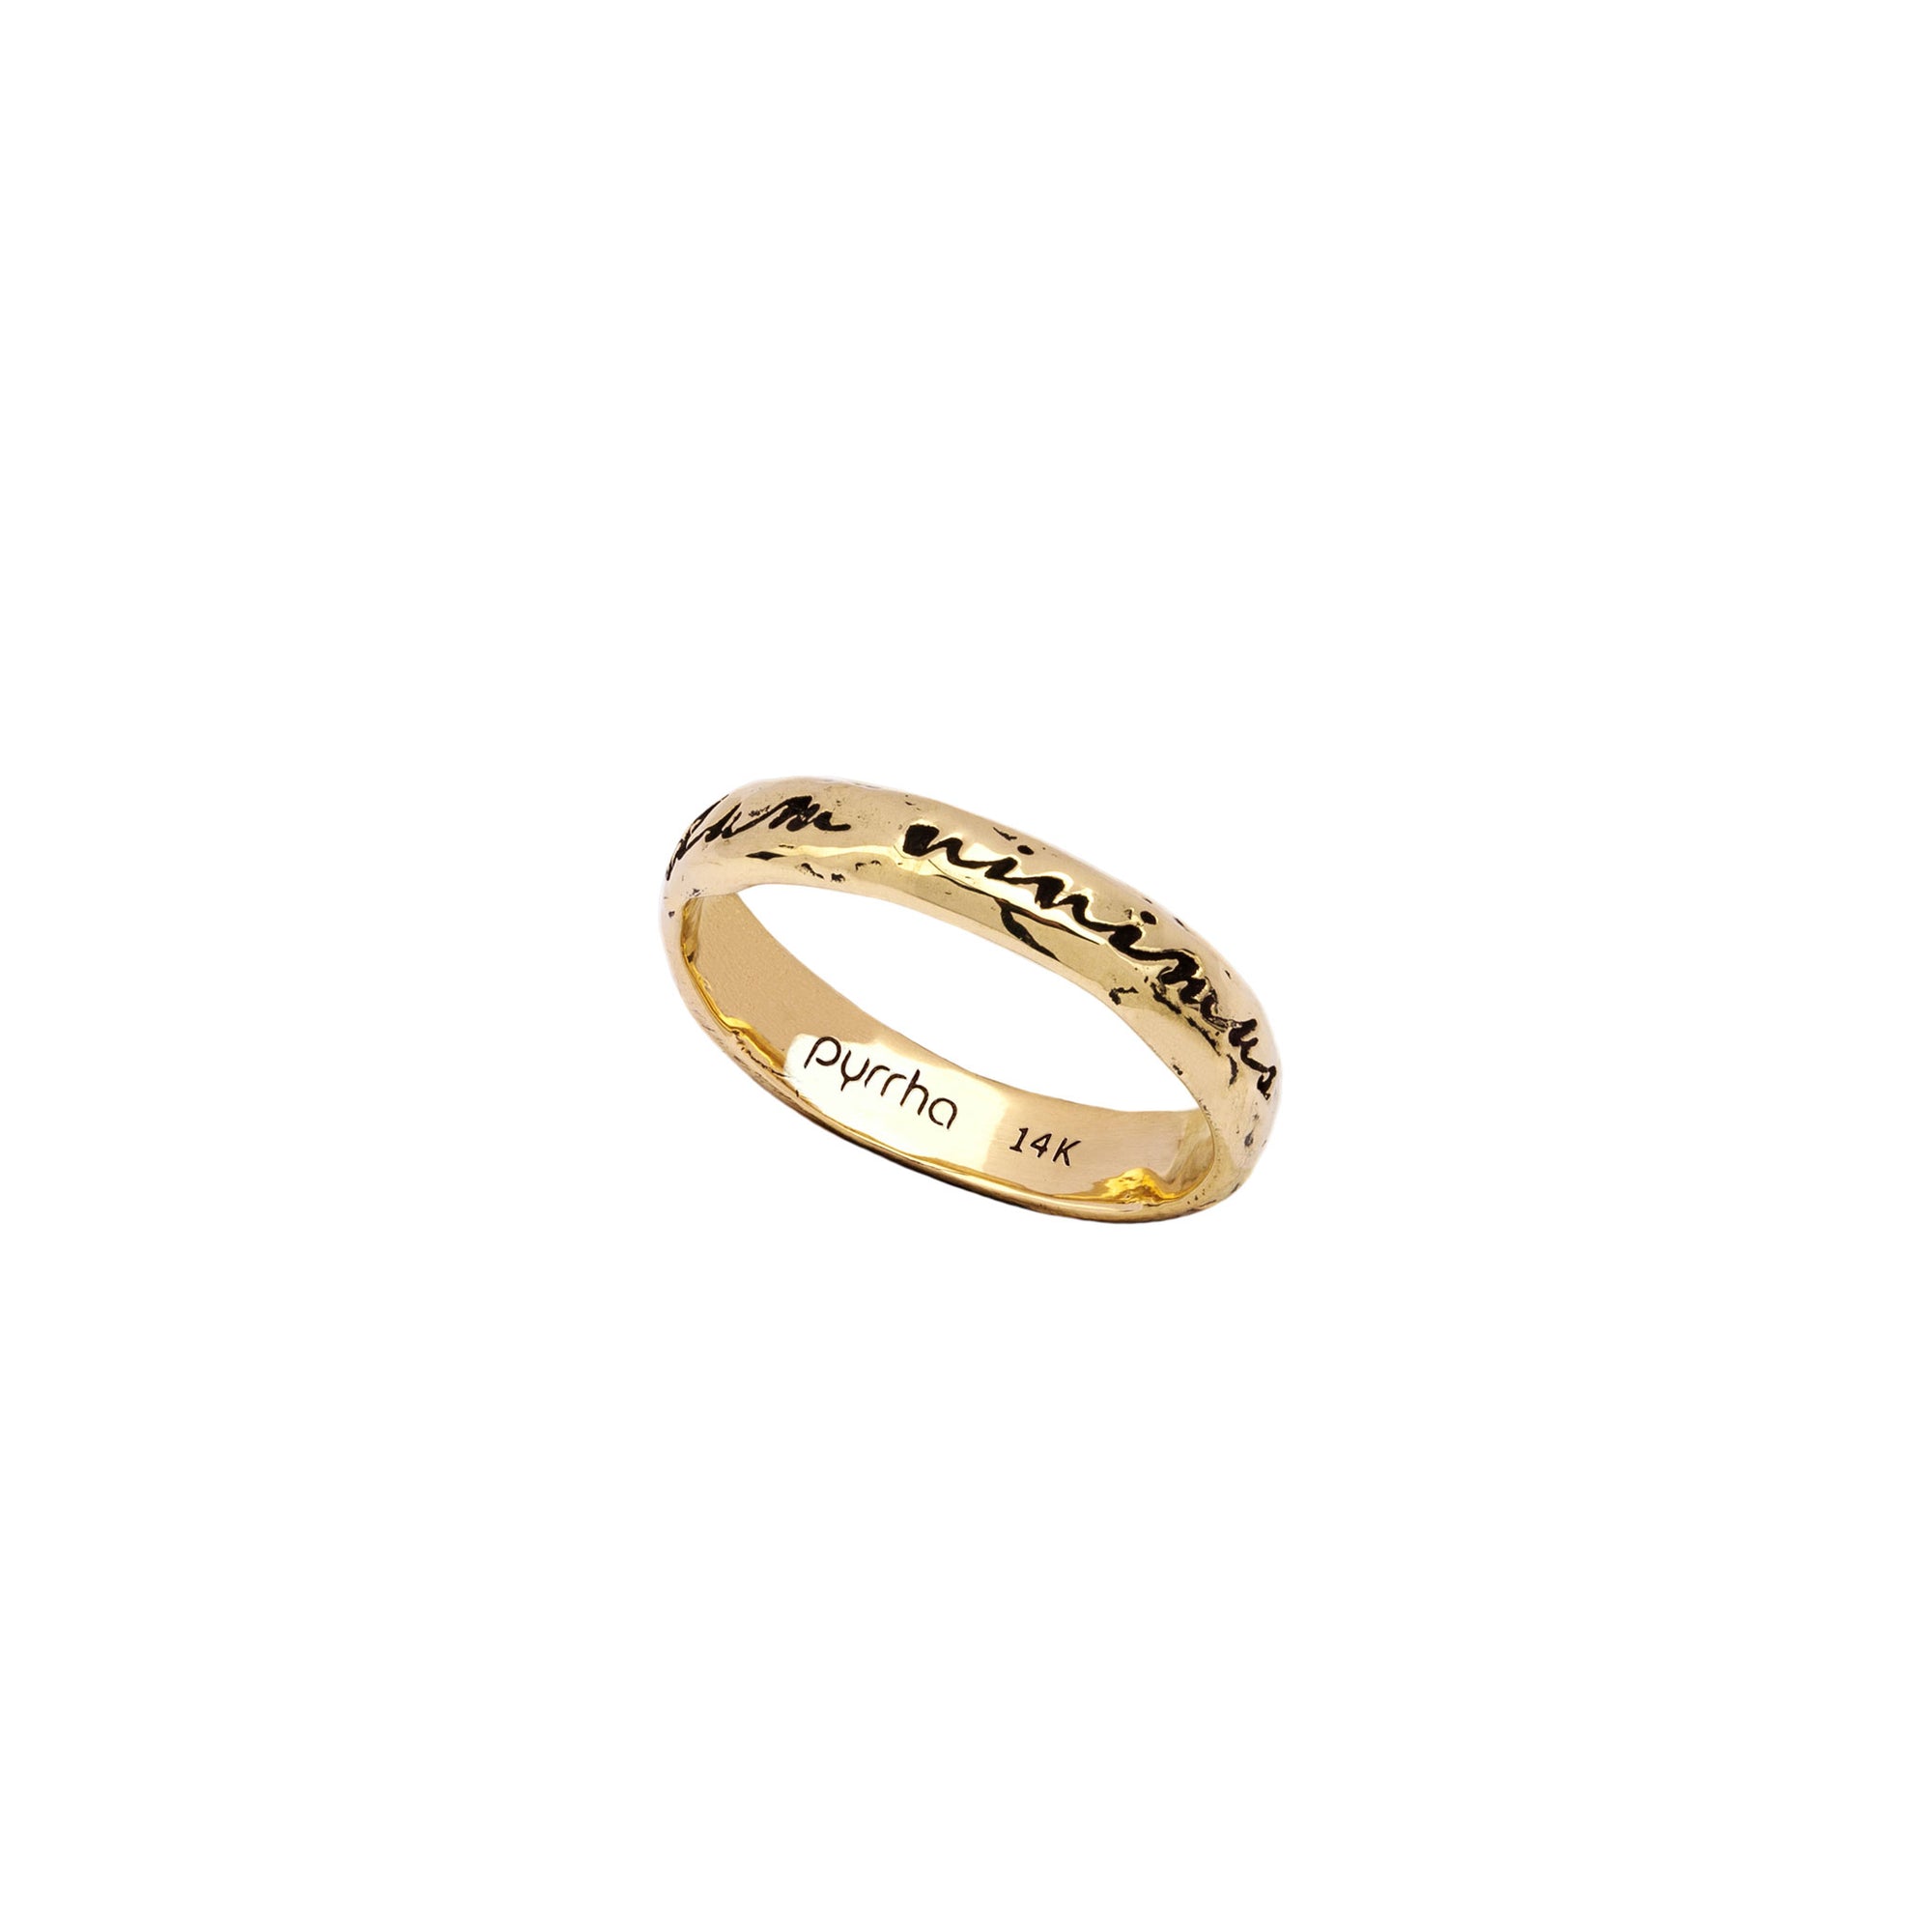 A 14k gold ring engraved with our While We Live Let Us Live motto.